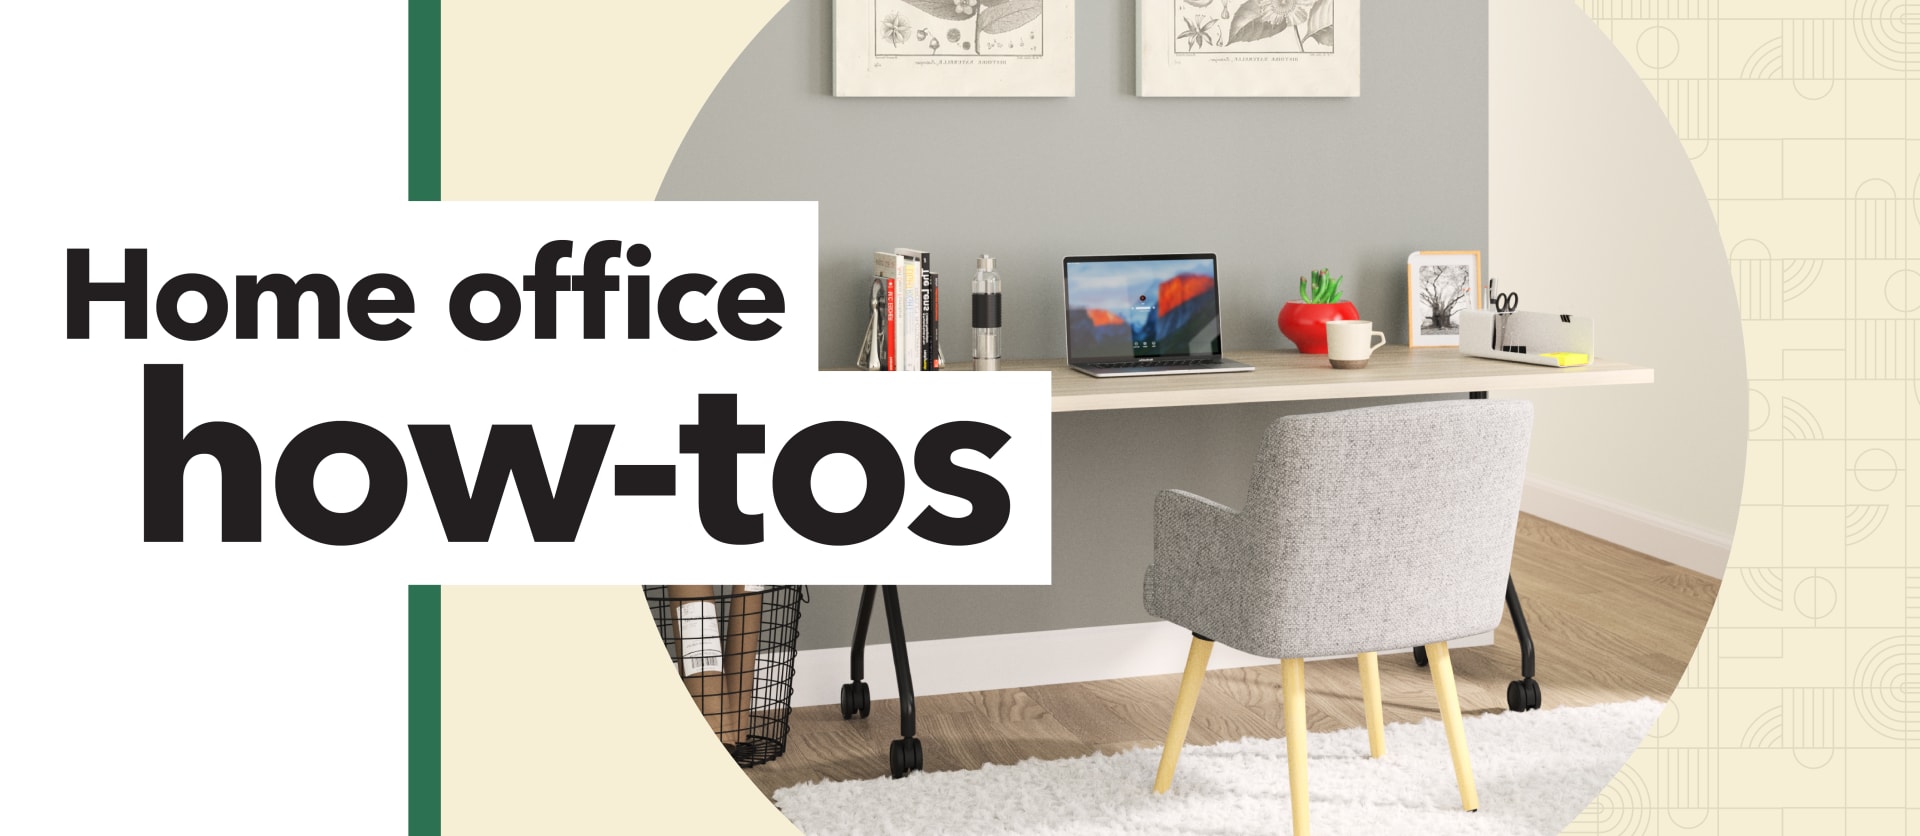 Work From Home Solutions That Fit Your Home Office Needs | HON ...